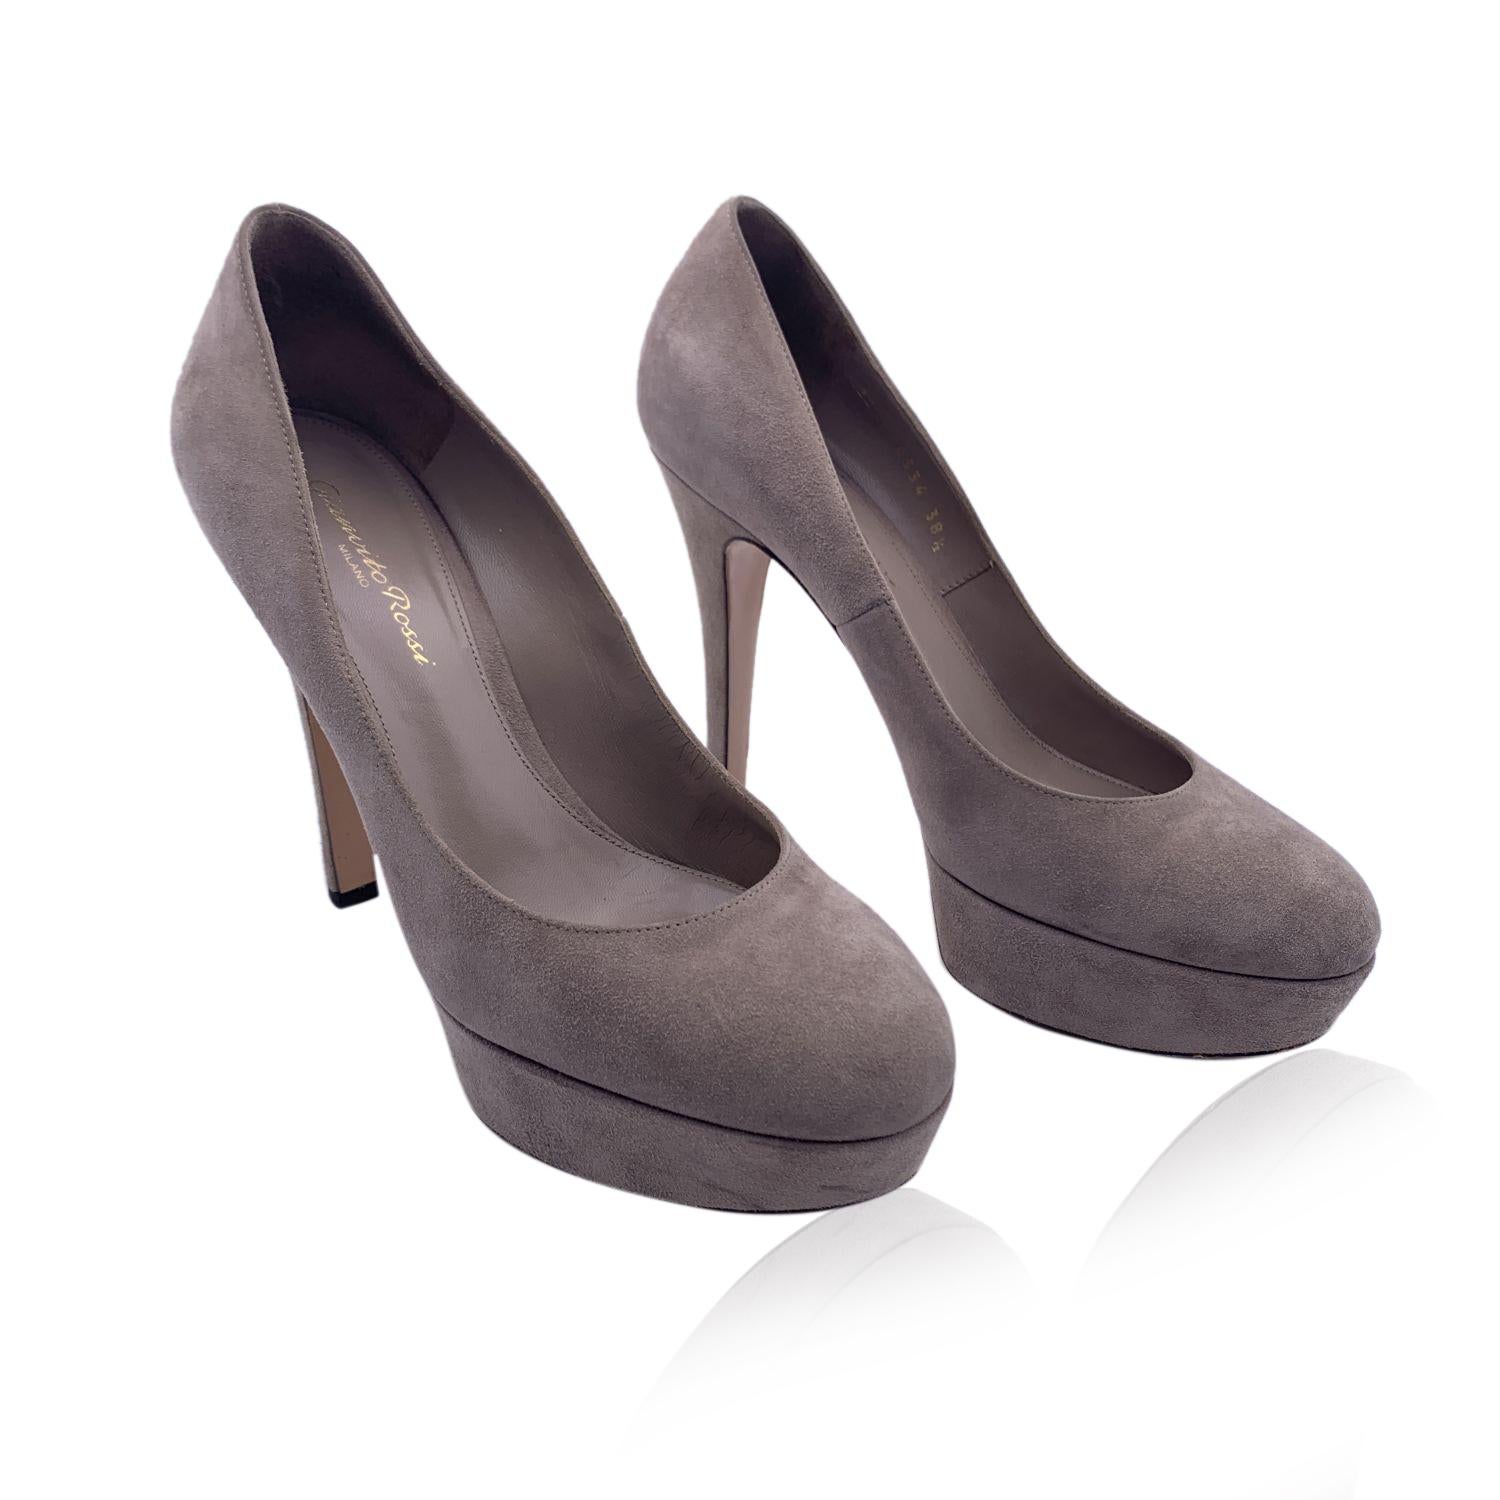 Classic Gianvito Rossi closed toe pumps. Crafted in taupe suede. They feature a round toe, slip on design, platform and a slim covered heel. Leather insole and outsole. Heels Height: 25 inches - 12.6 cm. Platform height: 1.2 inches - 3 cm Made in